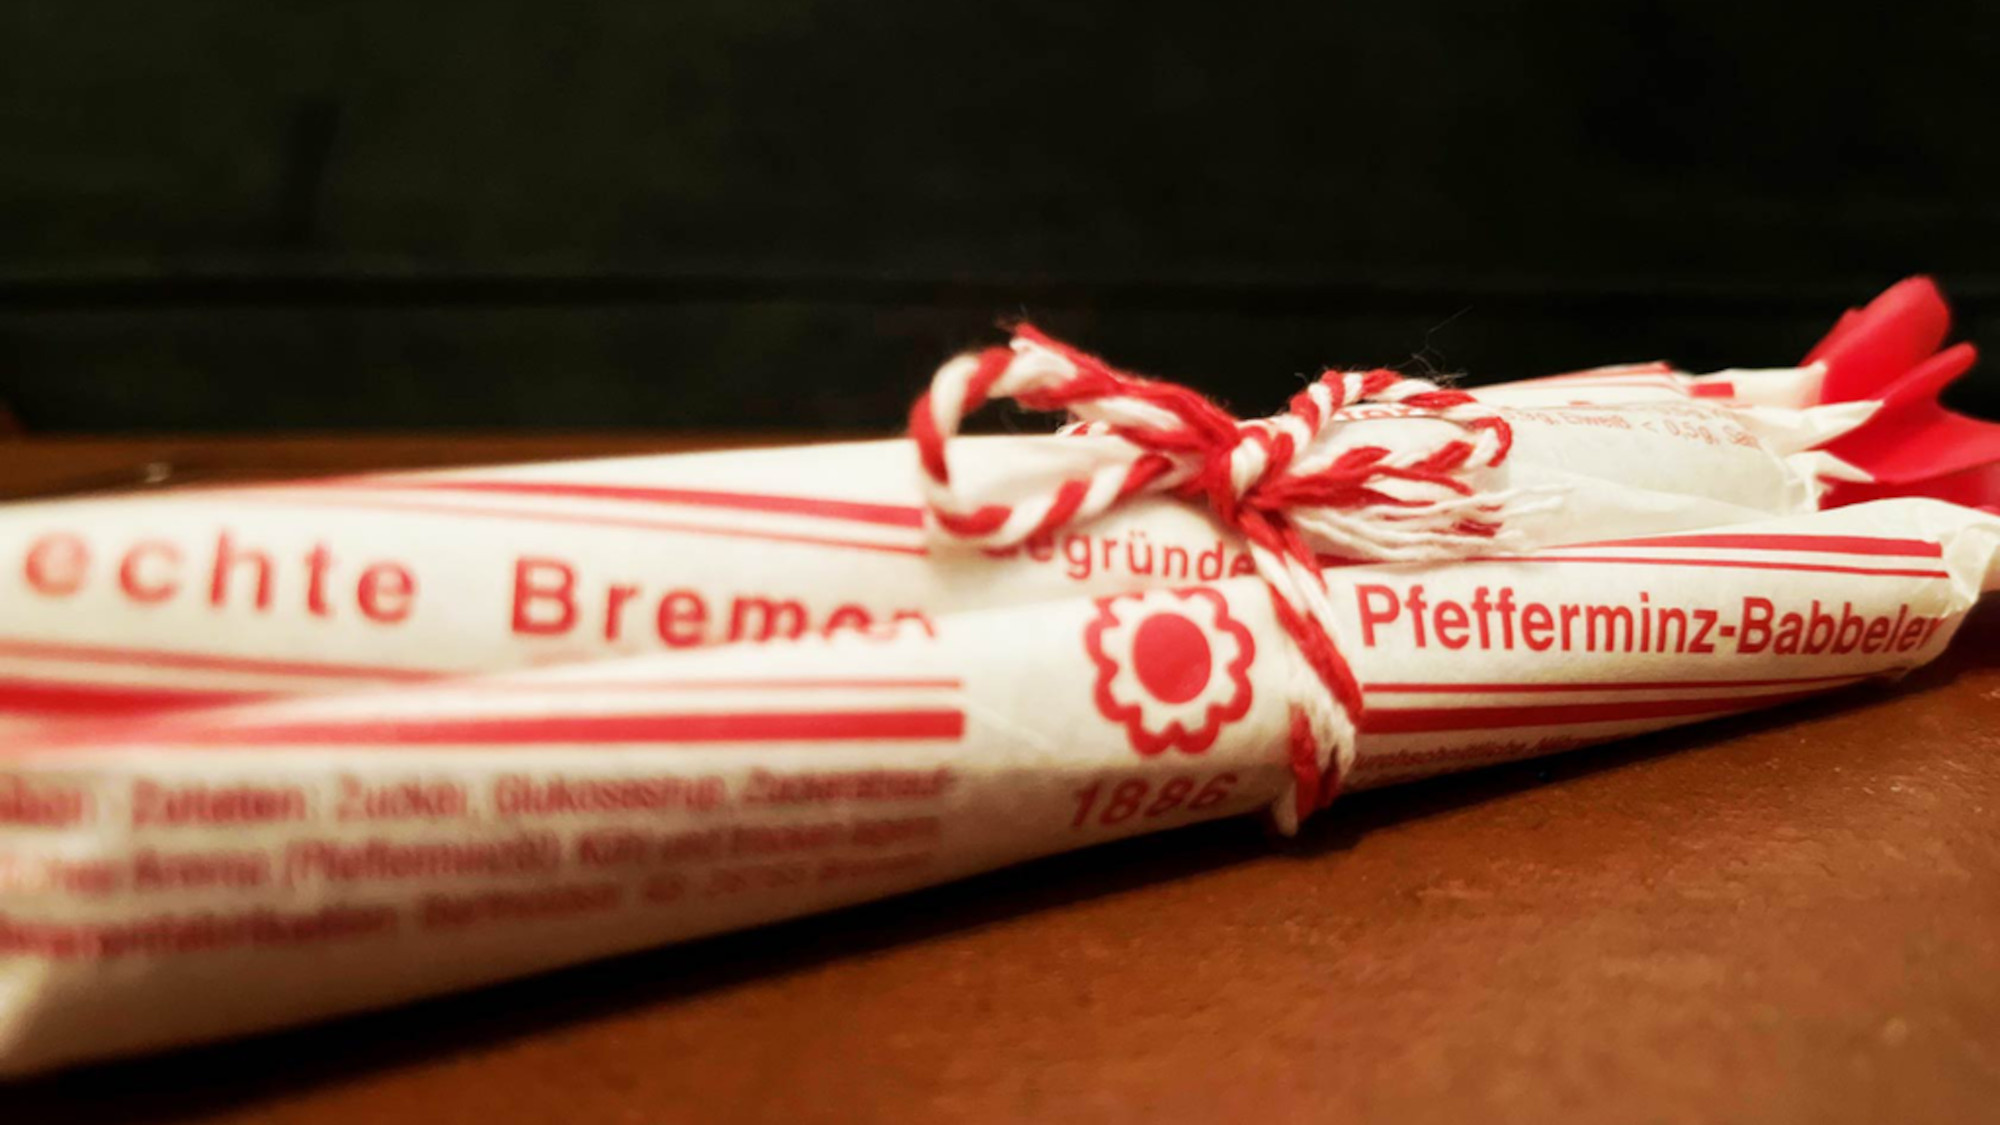 Five wrapped peppermint sticks in red and white paper sit on a table